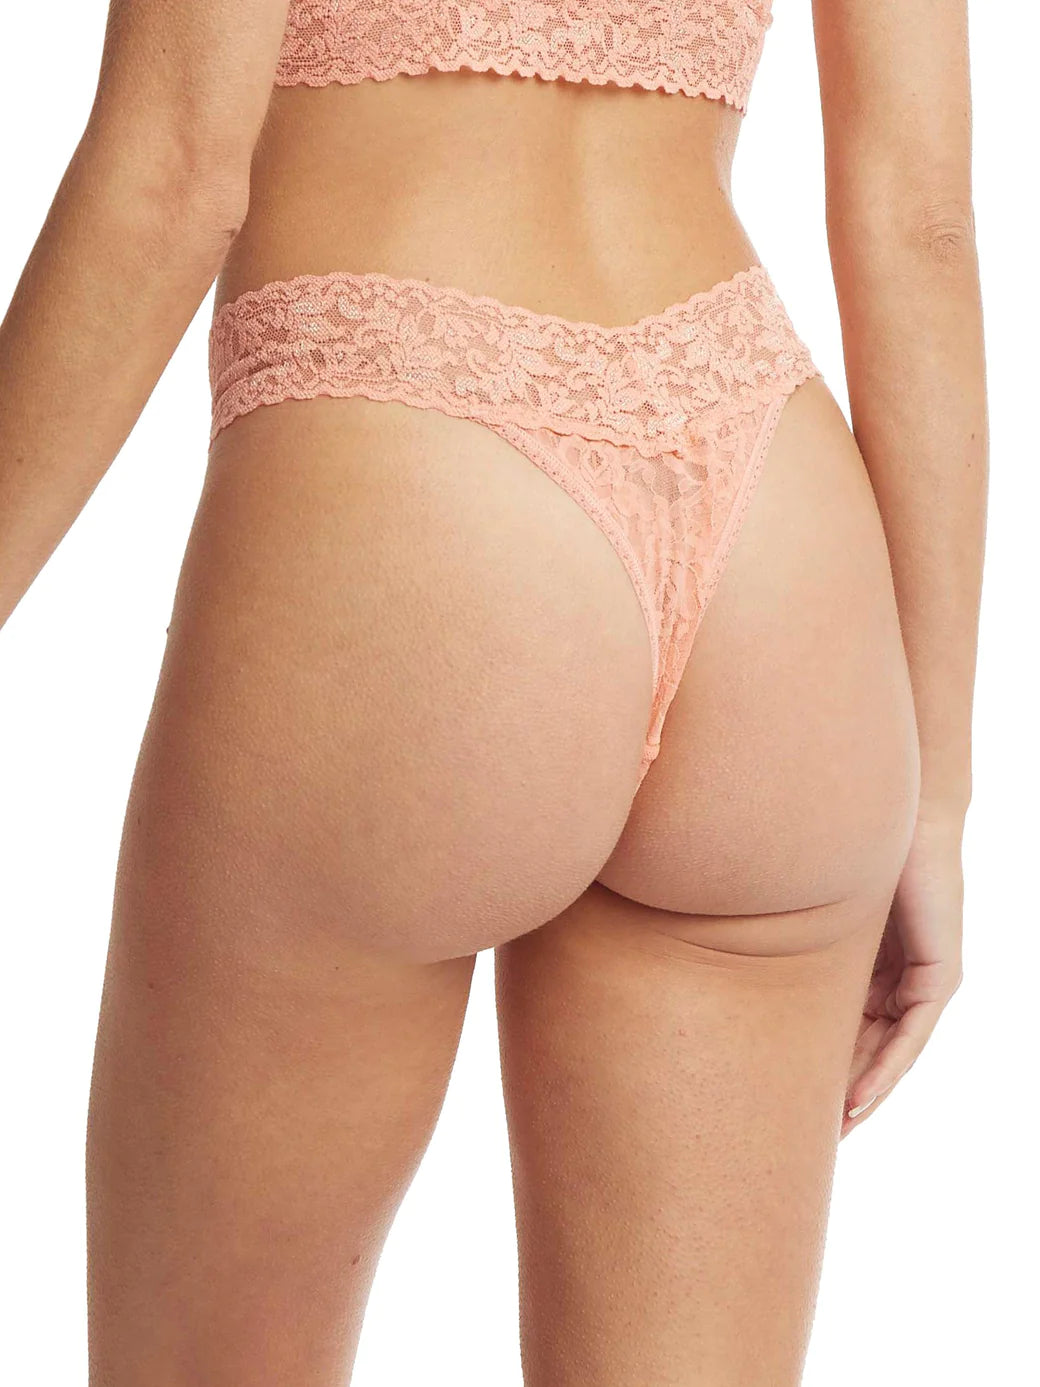 Original Rise Signature Lace Thong In Snapdragon Peach - Hanky Panky